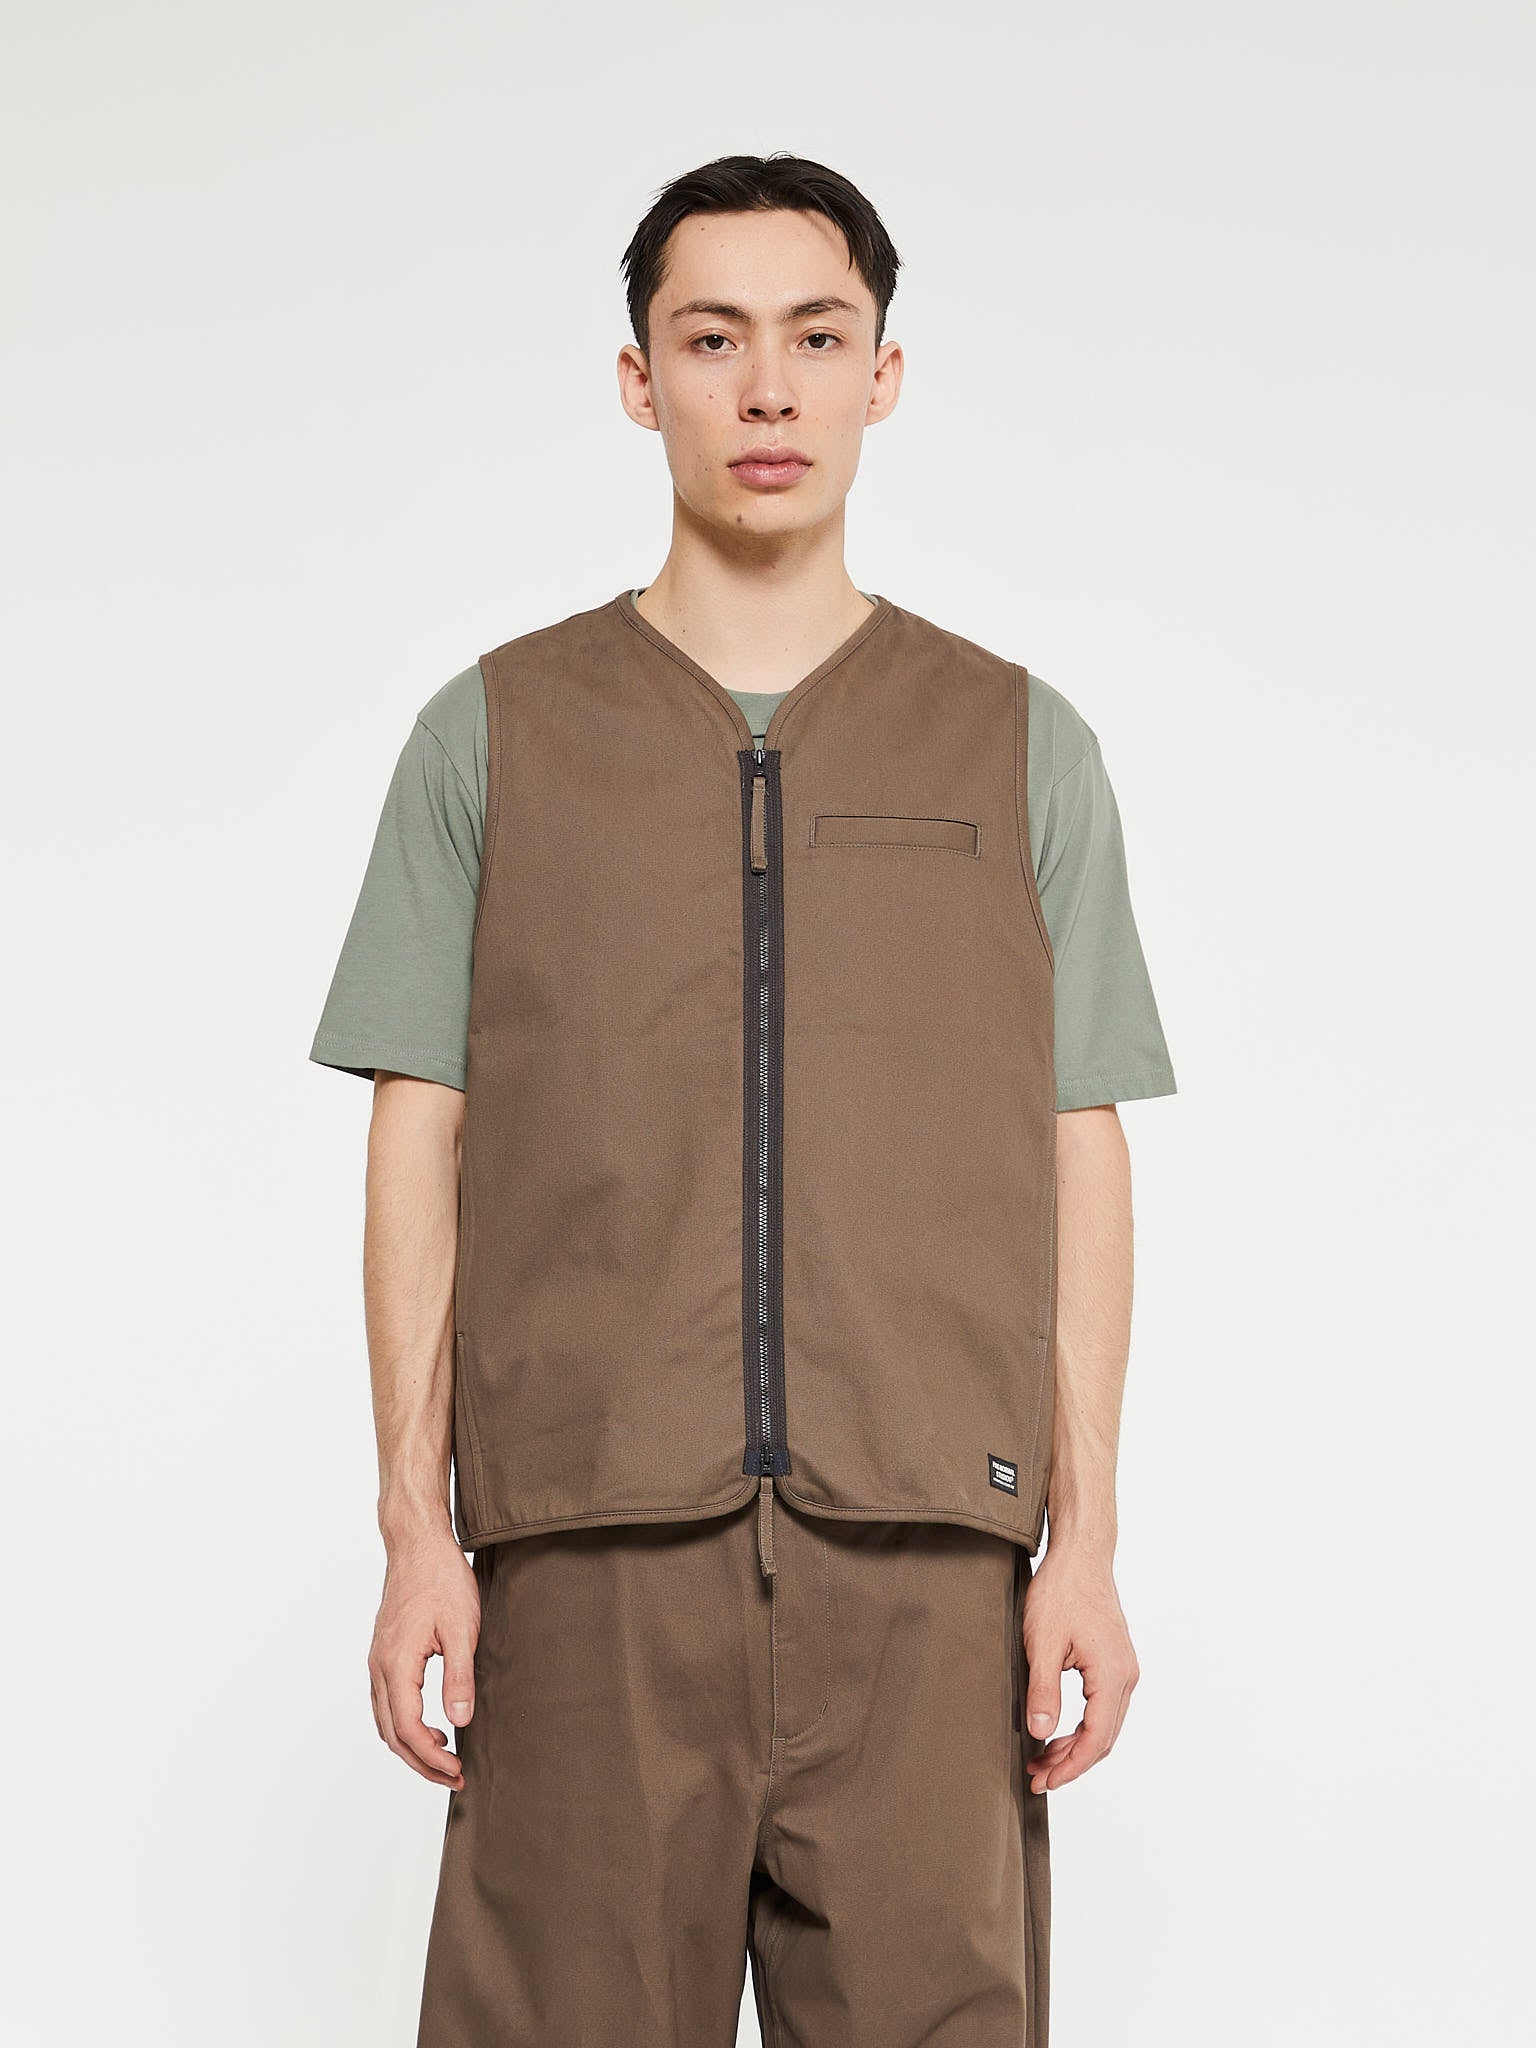 Pas Normal Studios - Off-Race Cotton Twill Vest in Brown